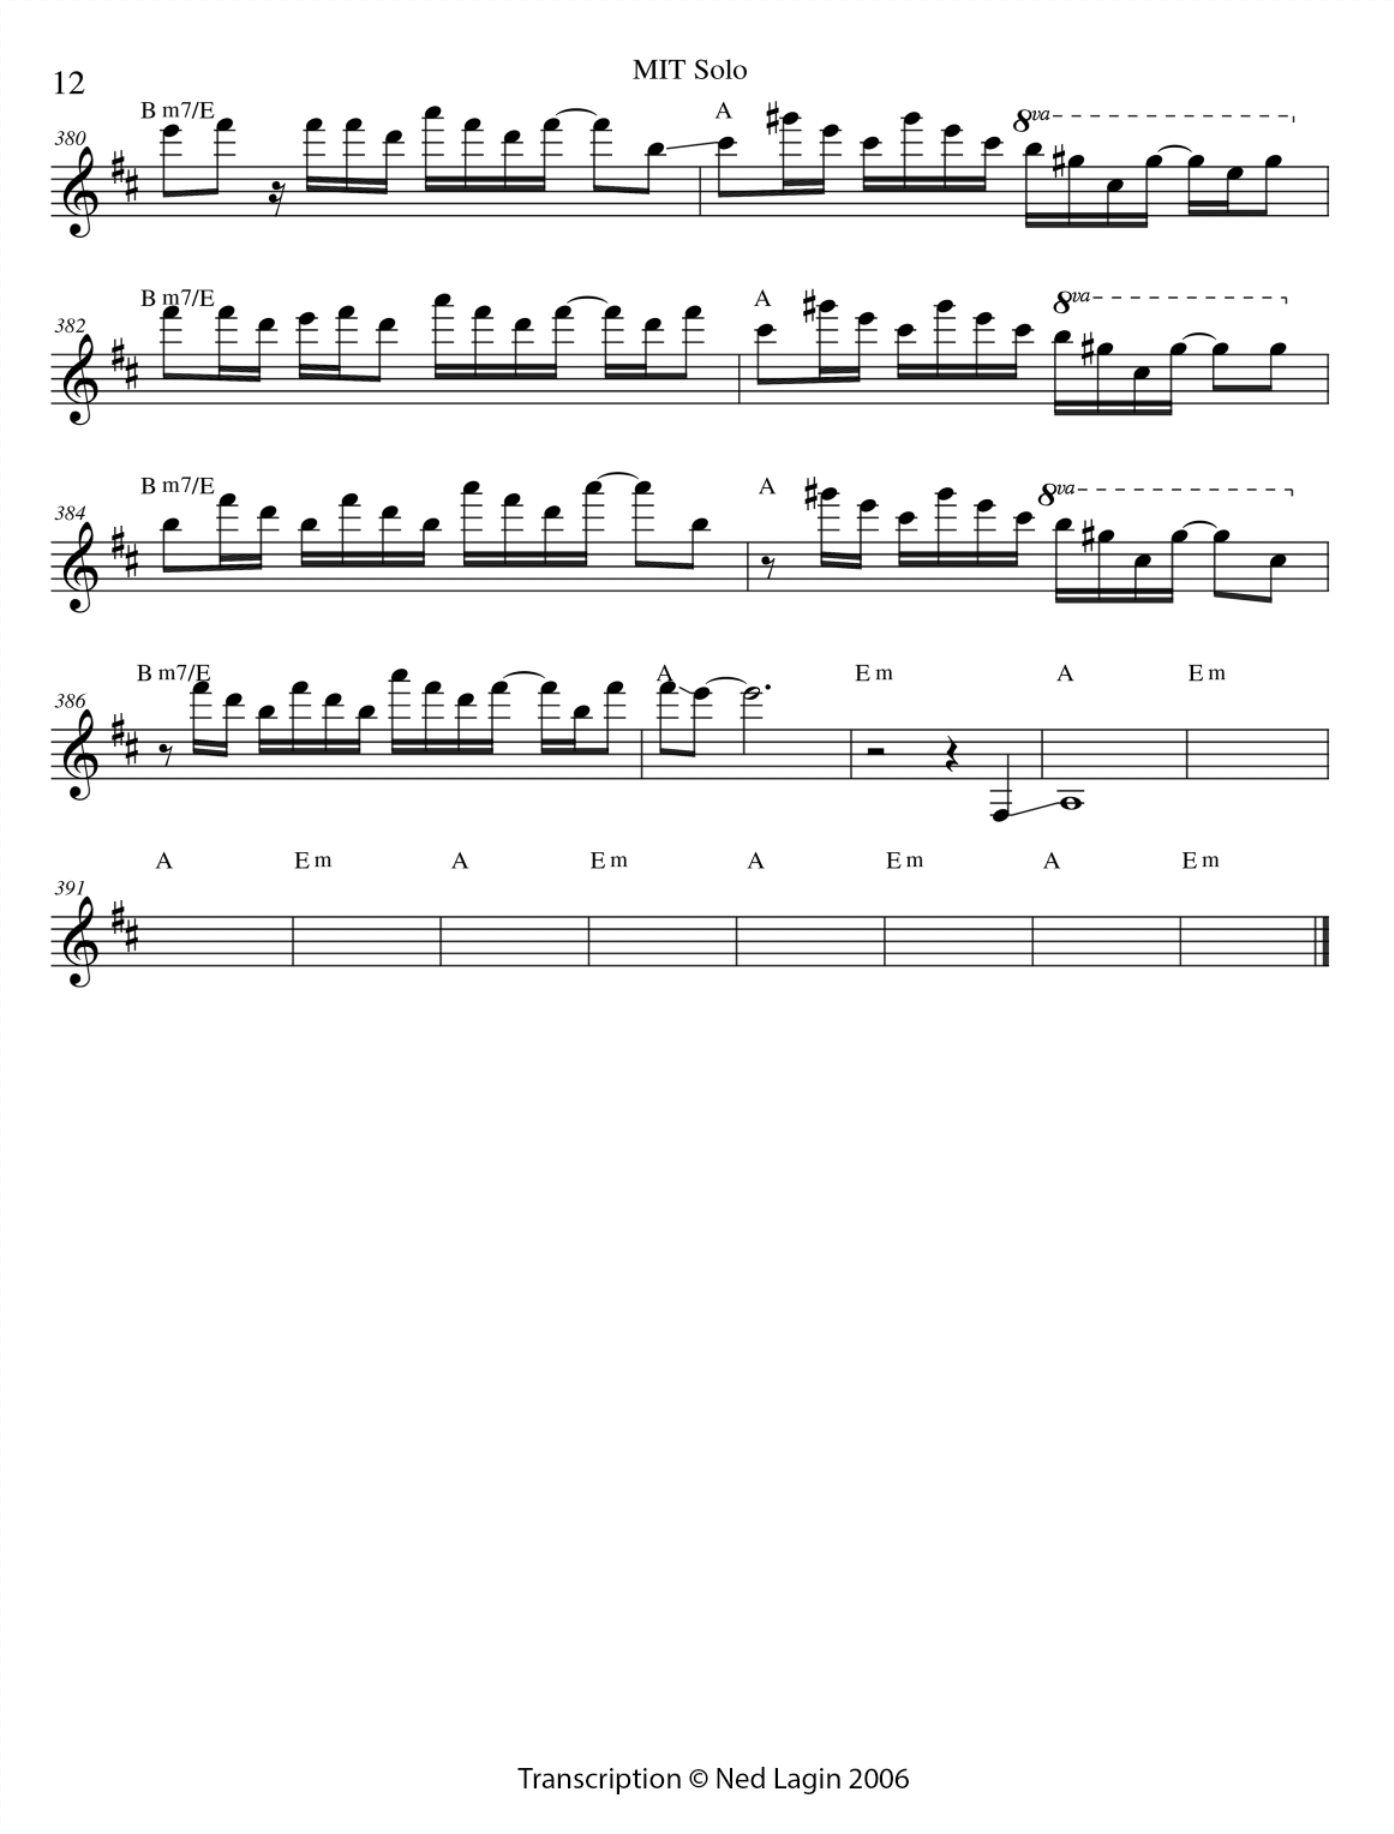 Jerry Garcia guitar solo transcription Page 12 - Photo © Ned Lagin